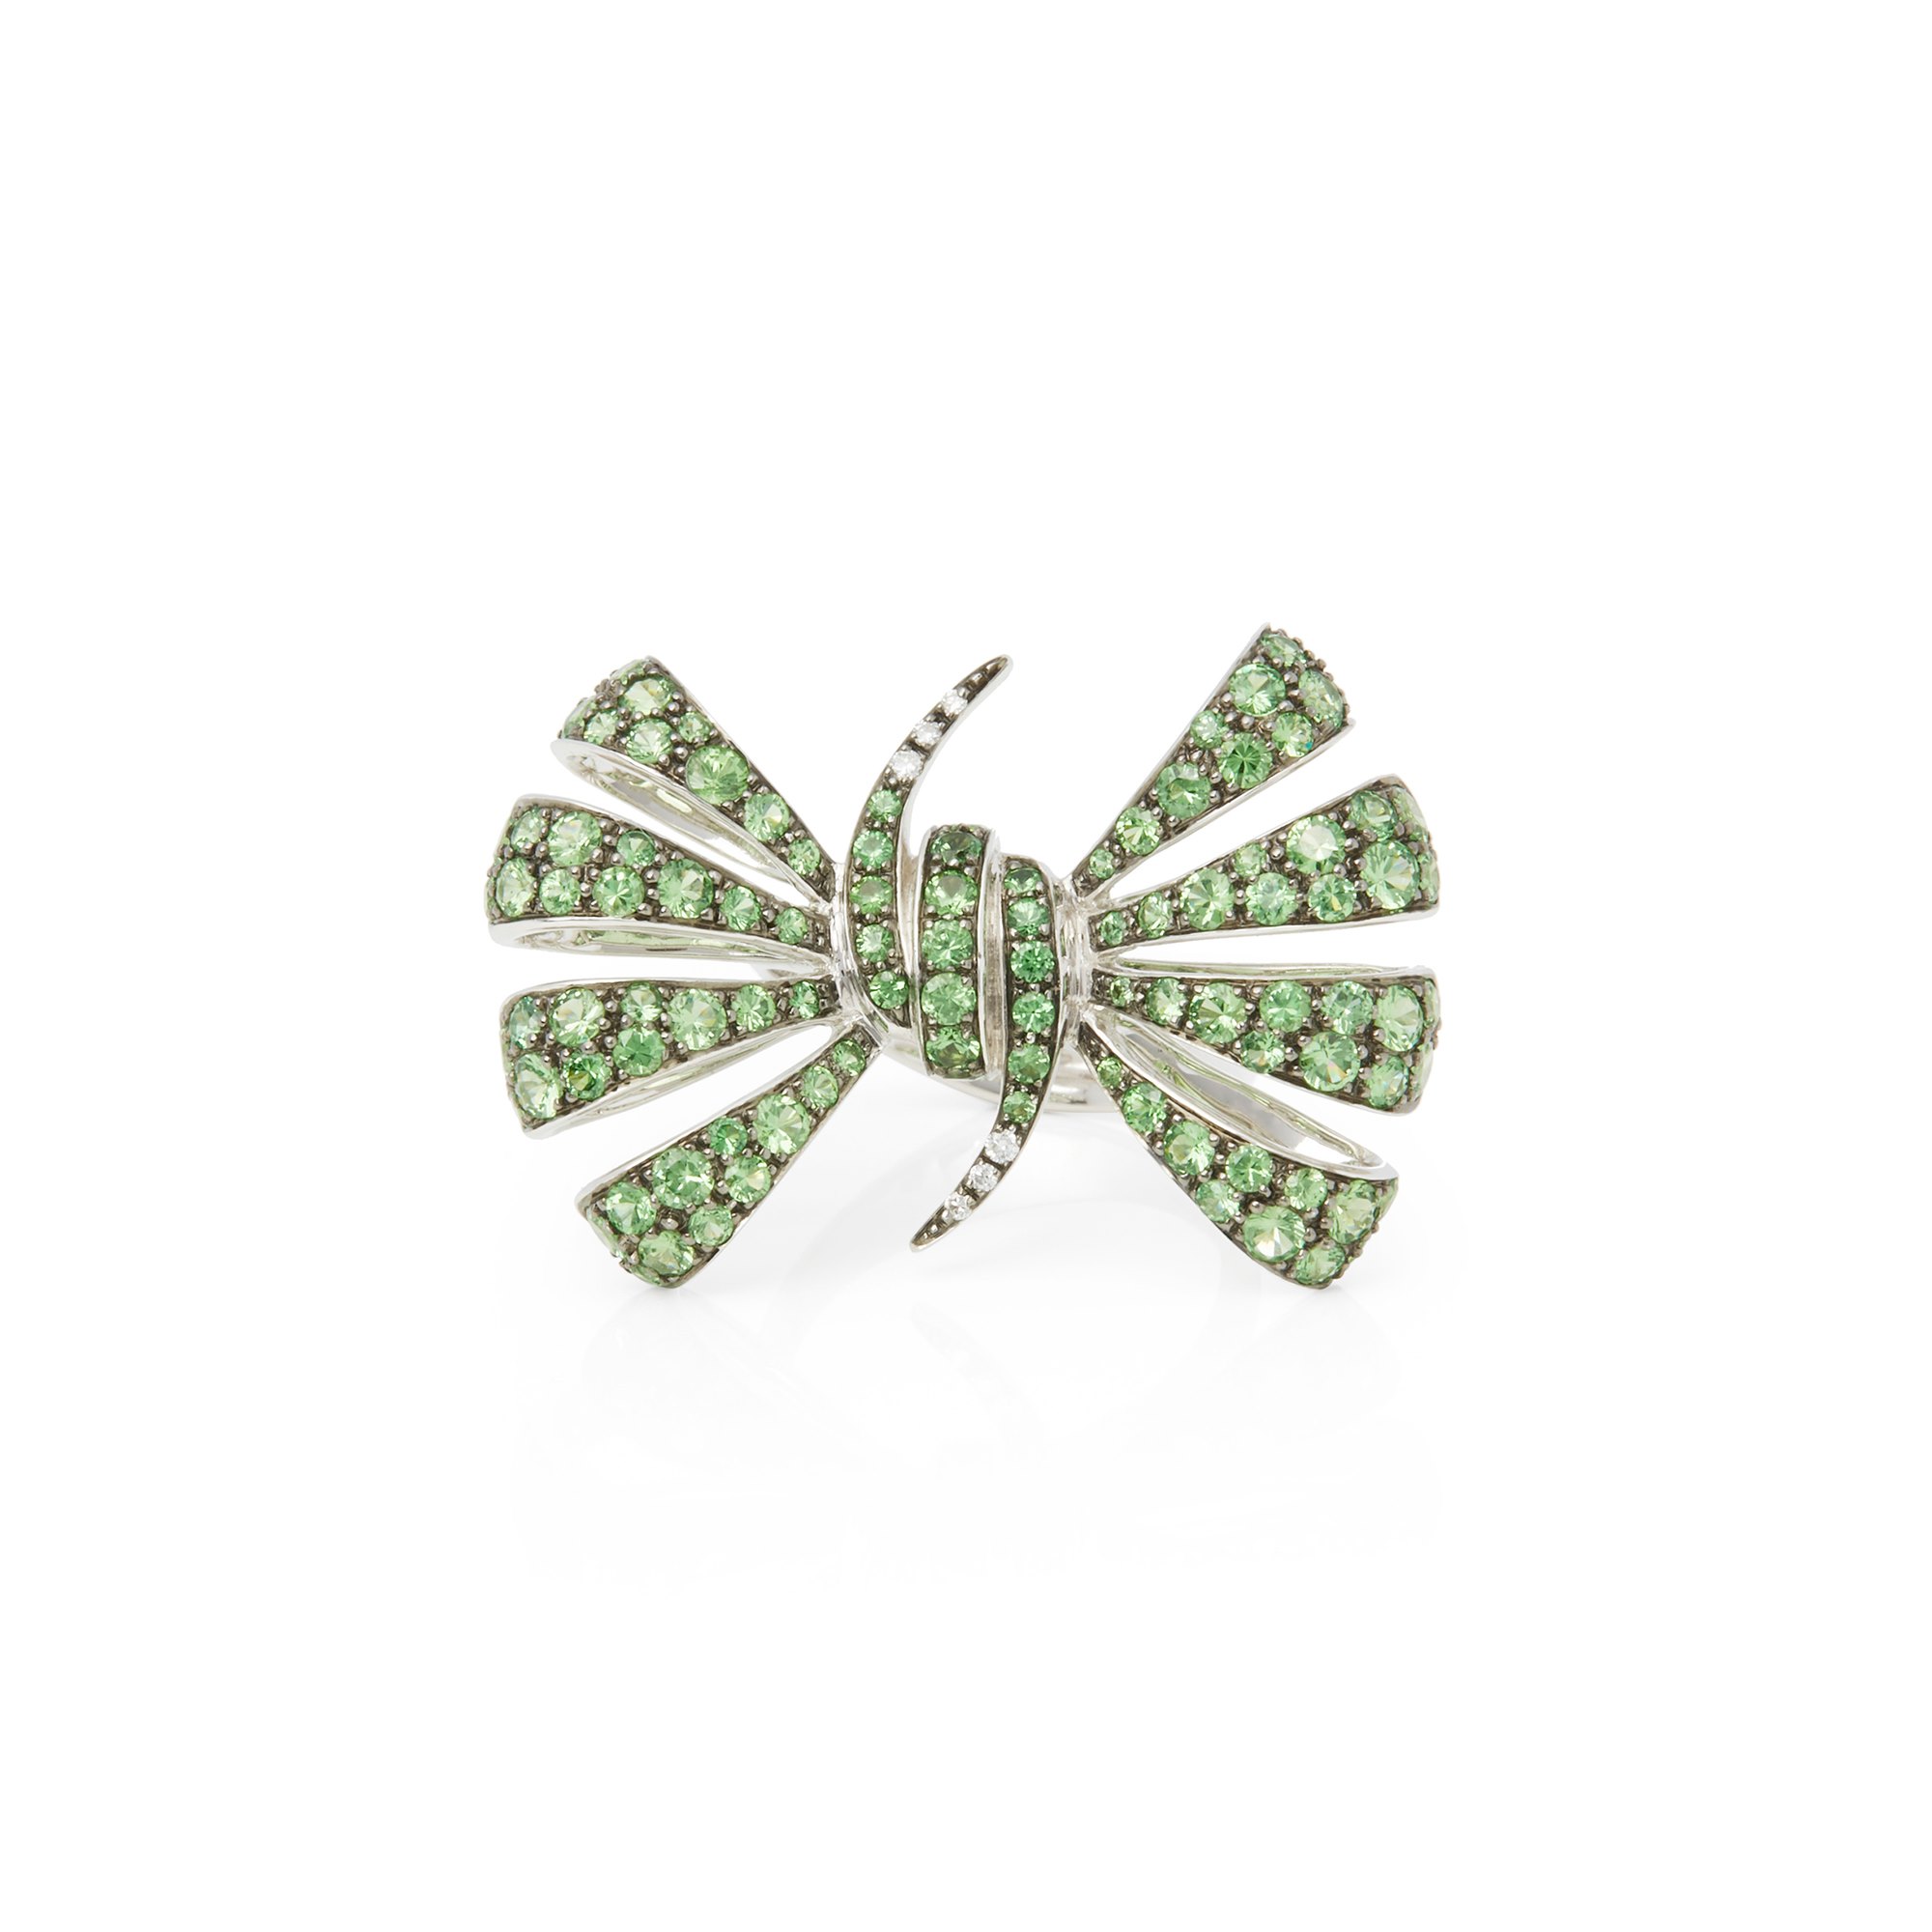 Stephen Webster 18ct White Gold Forget me Not Pave Tsavorite Bow Ring